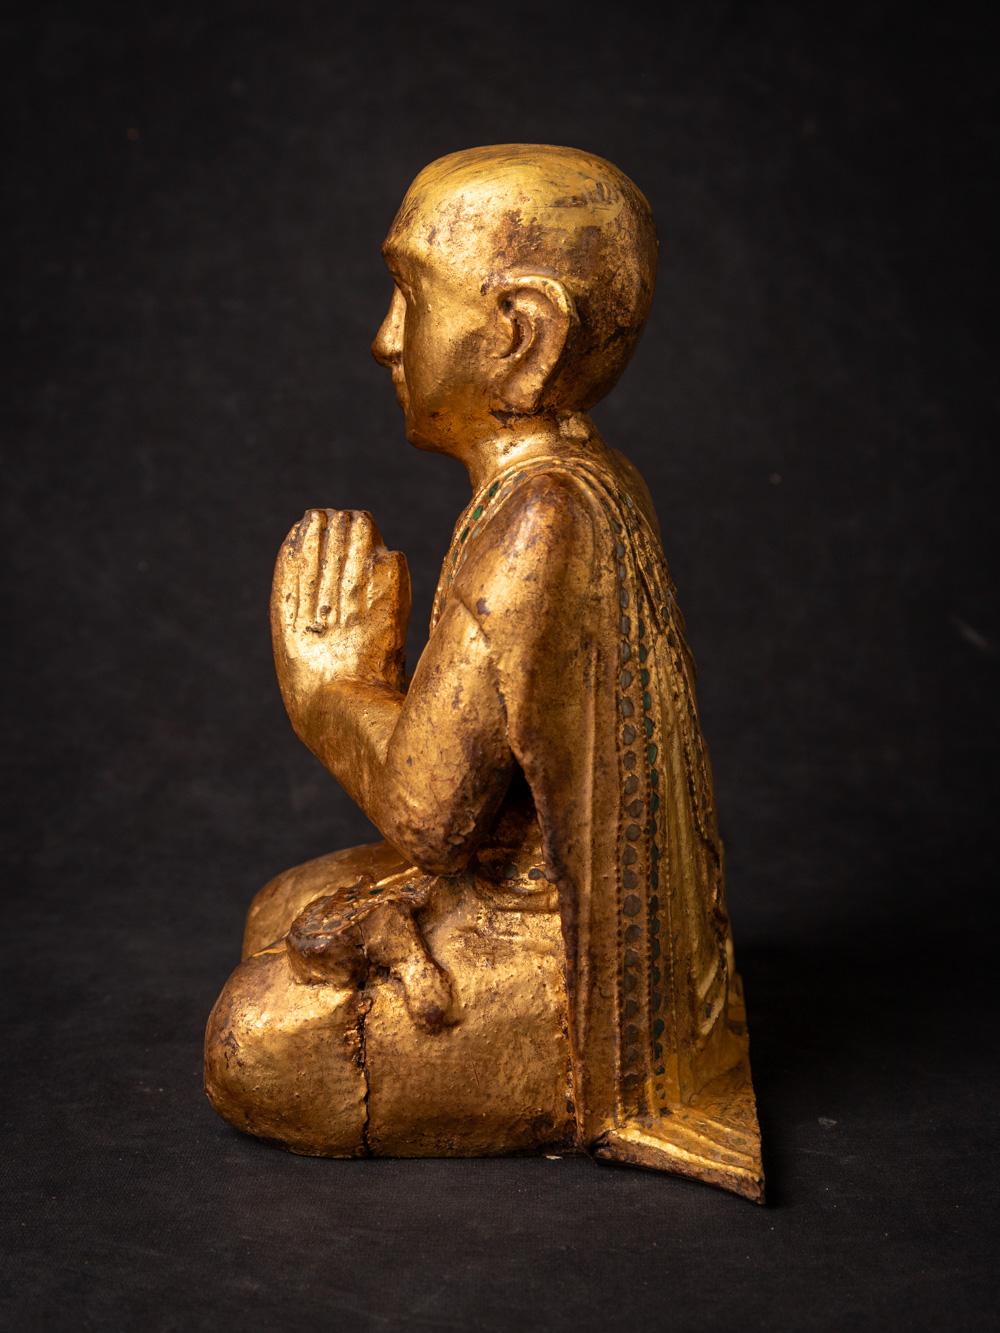 The Antique wooden Burmese Monk statue is a remarkable and spiritually significant artifact originating from Burma. Crafted from wood and gilded with 24-karat gold, each statue stands at 23.5 cm in height and measures 19.7 cm in width and 13.3 cm in